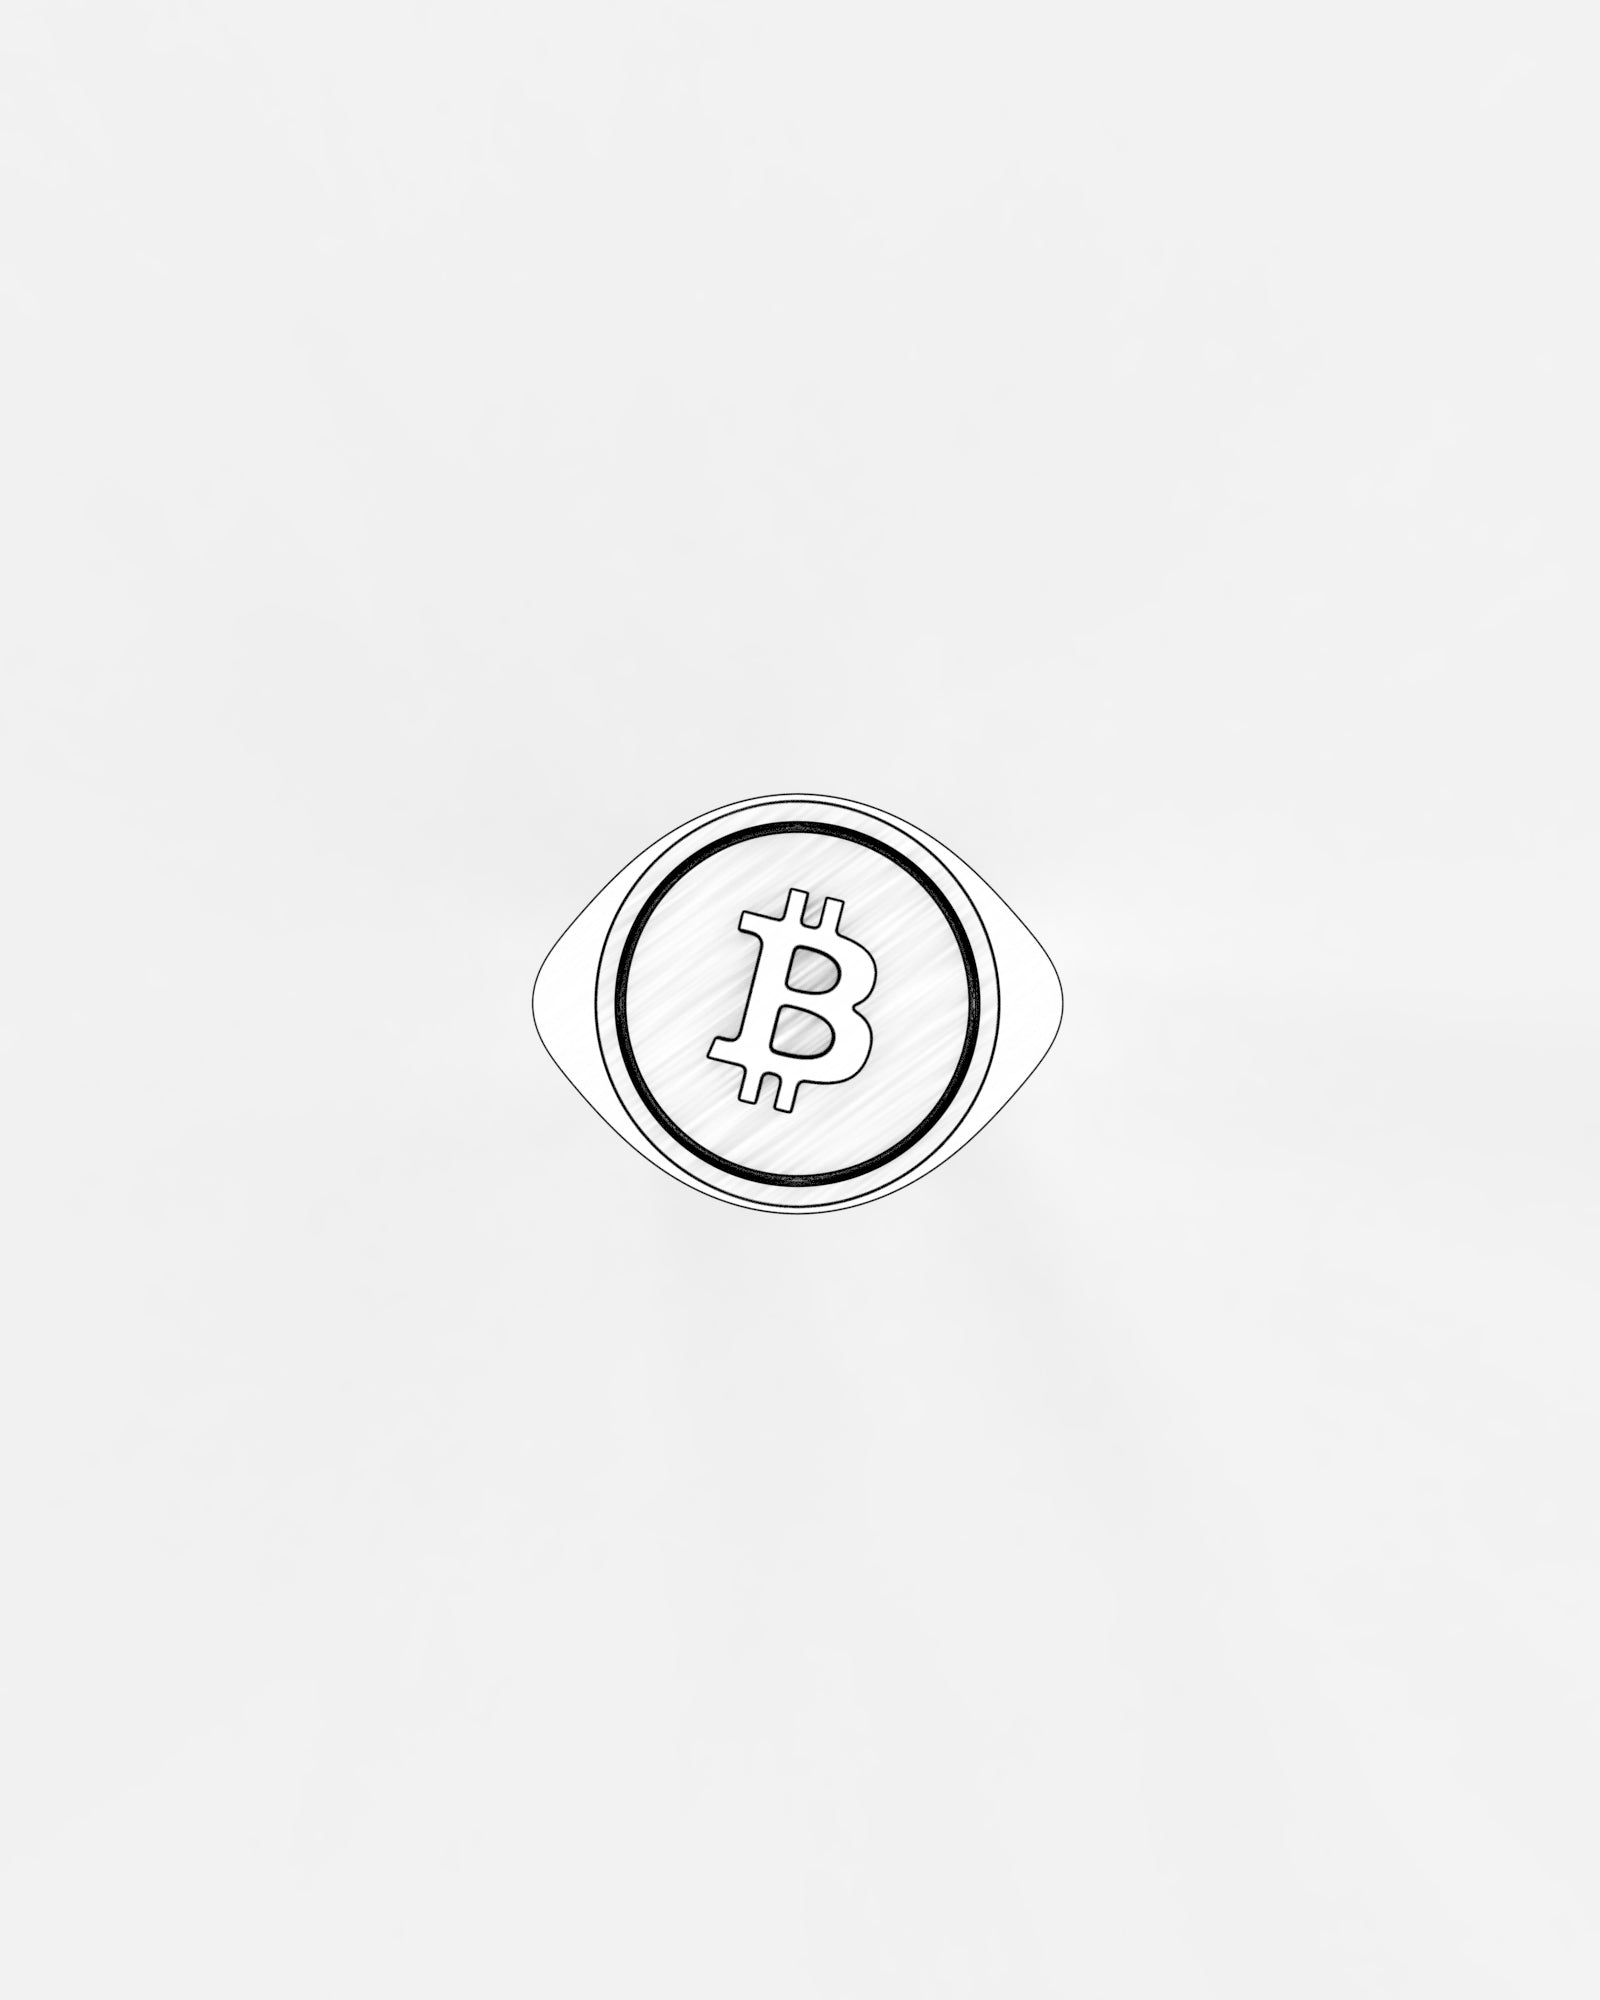 Large Bitcoin Crypto Ring in 9k Yellow Gold / Sterling Silver by Wilson Grant